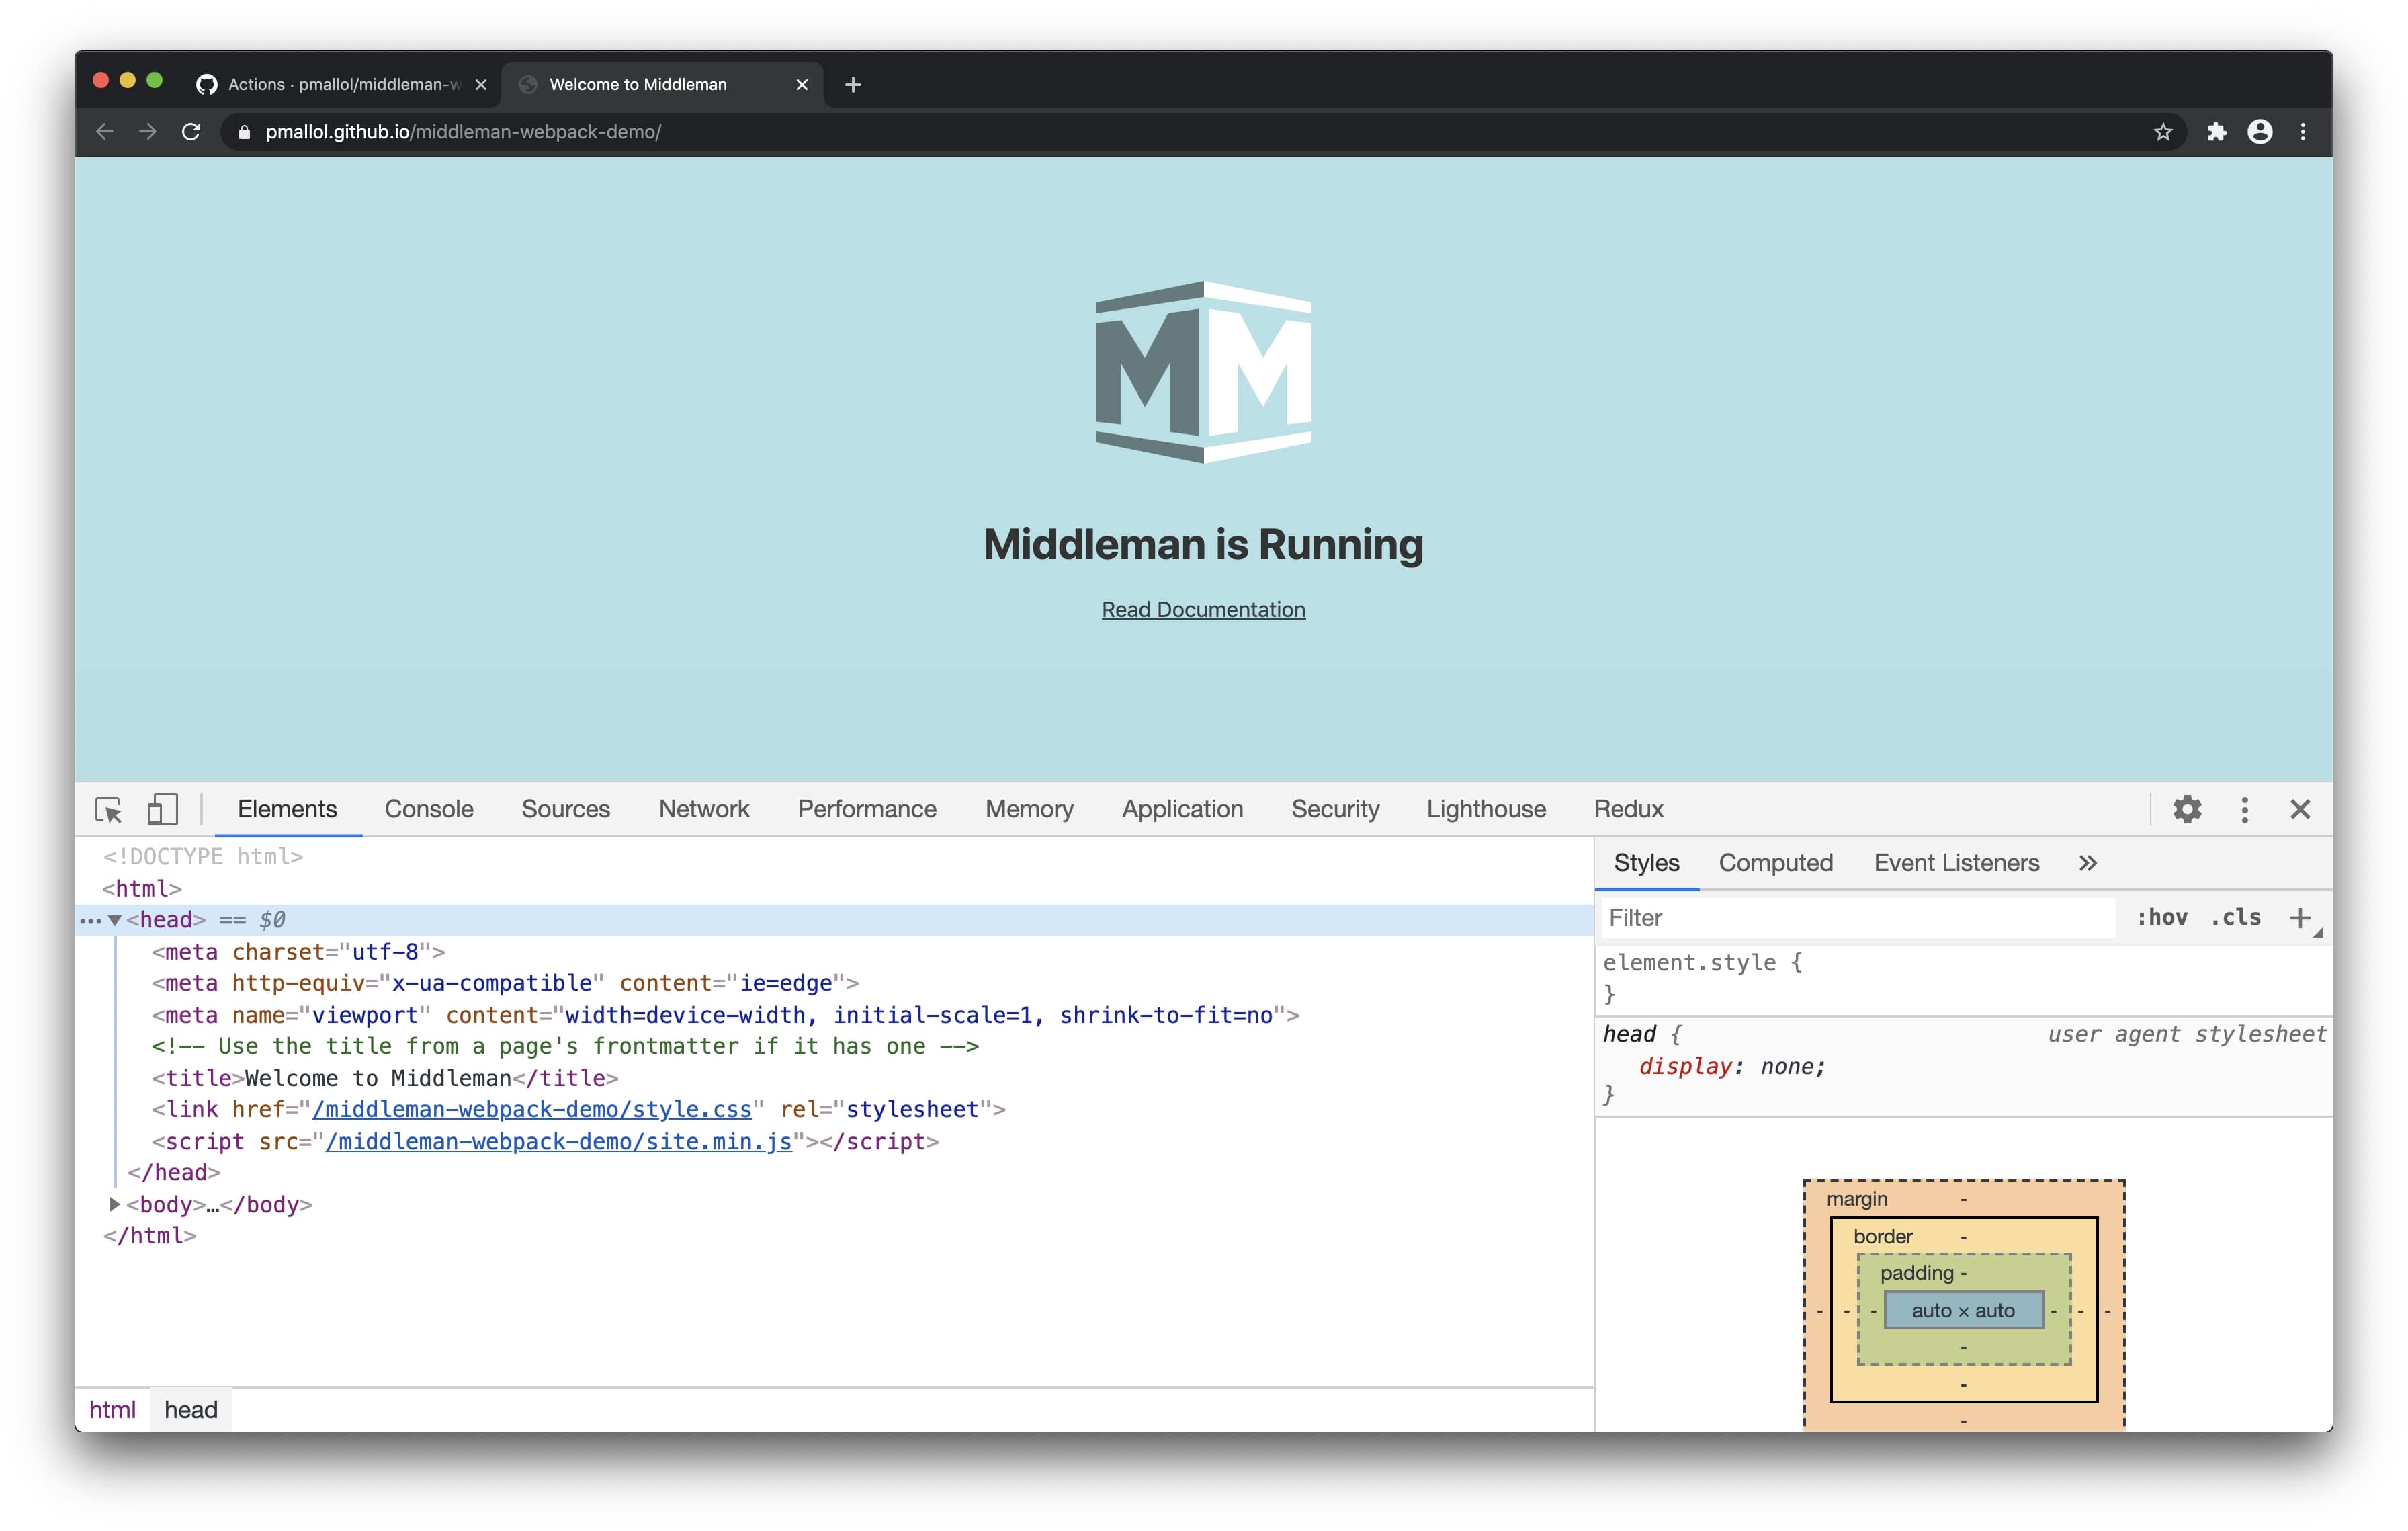 Screenshot of Middleman app in GitHub Pages with dev tools open inspecting the head tag of the HTML